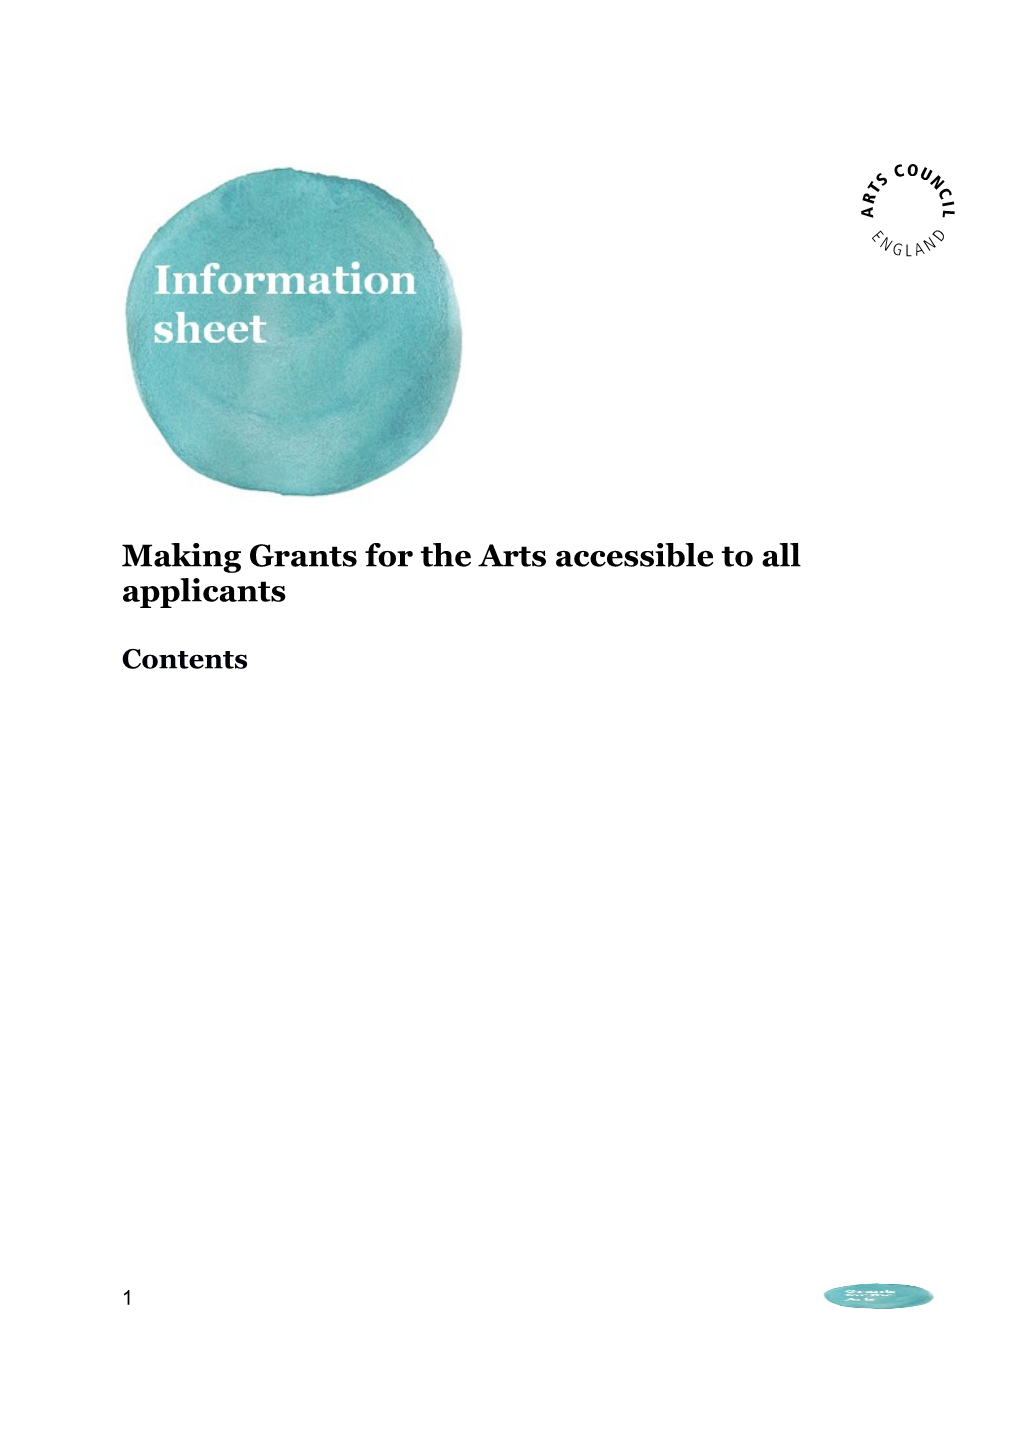 Making Grants for the Arts Accessible to All Applicants